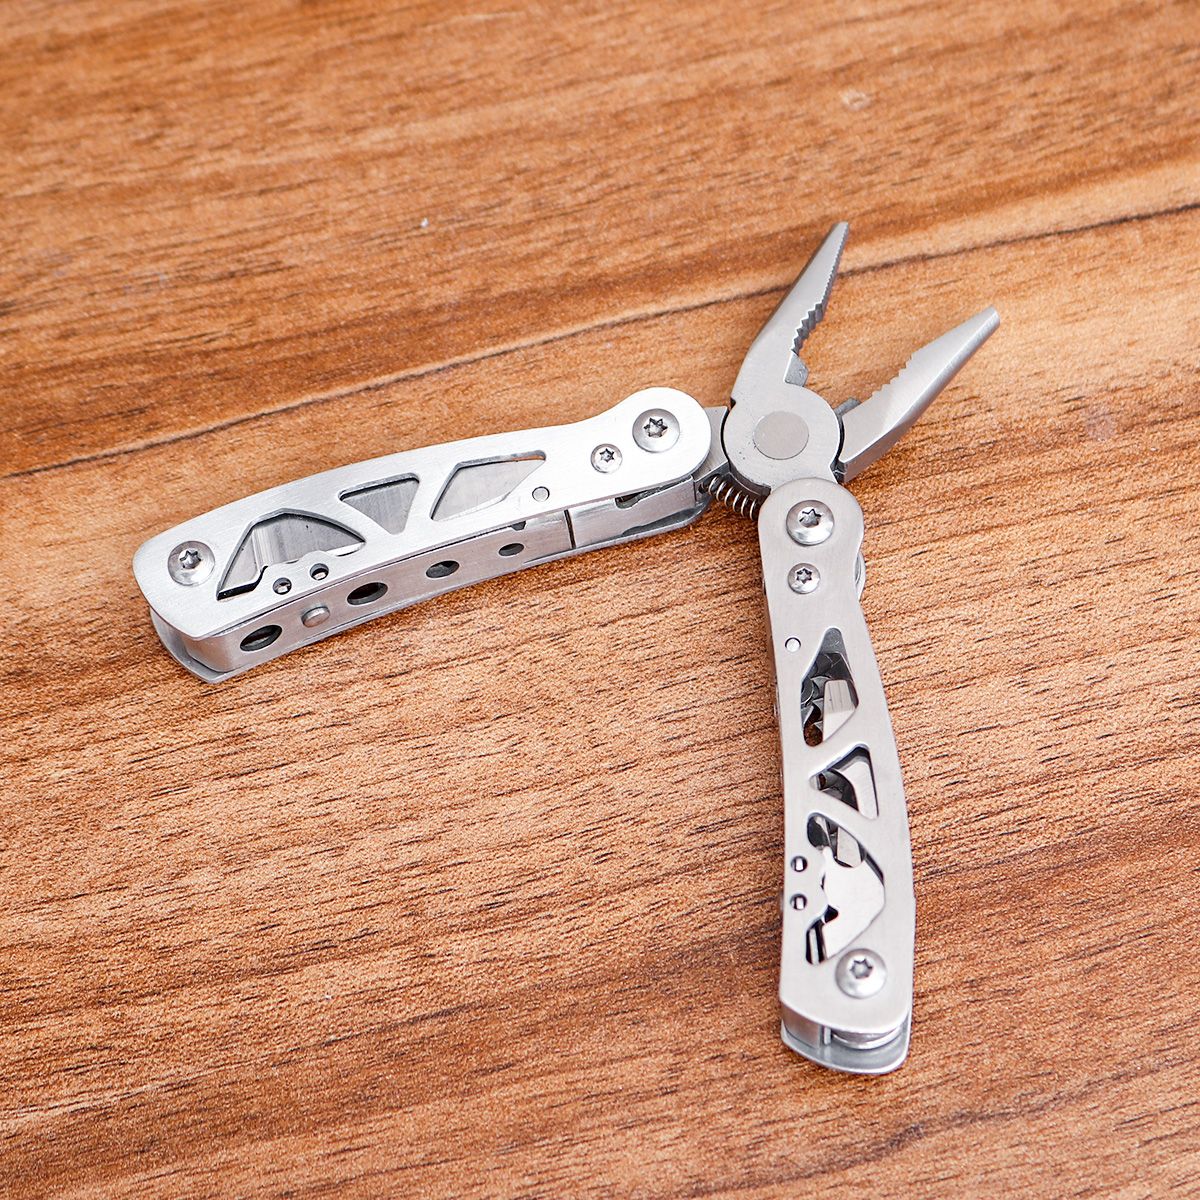 Portable-Stainless-Steel-Combination-Pliers-Survival-Plier-Fold-Pocket-Screwdriver-Multi-Tool-1524318